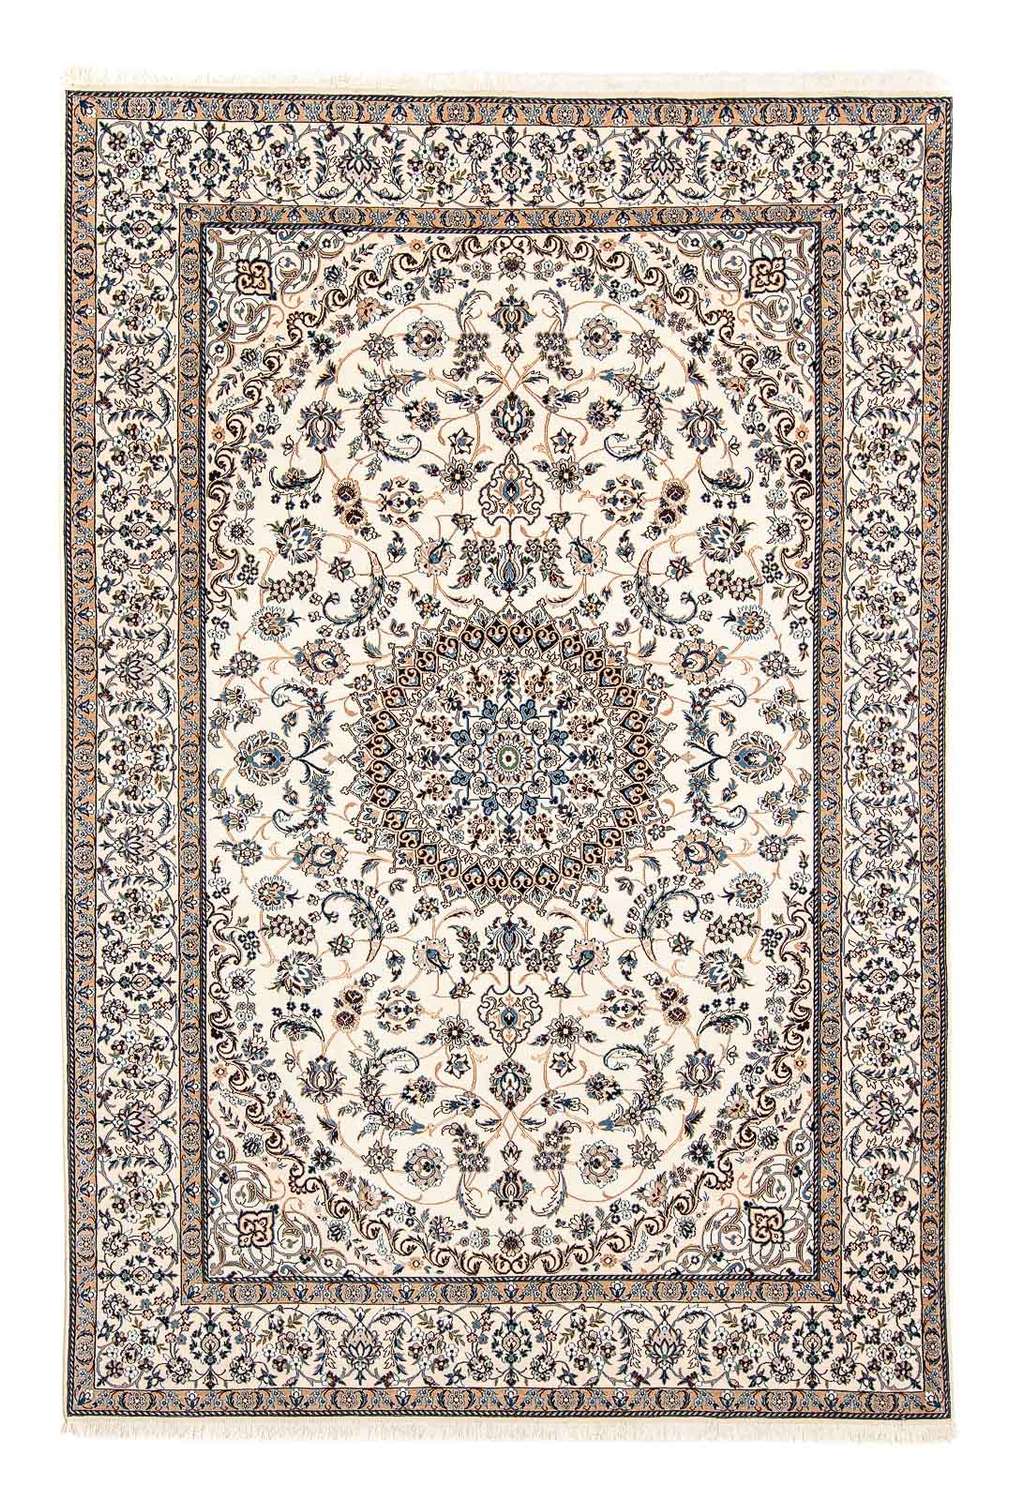 Persisk teppe - Nain - Royal - 291 x 202 cm - beige